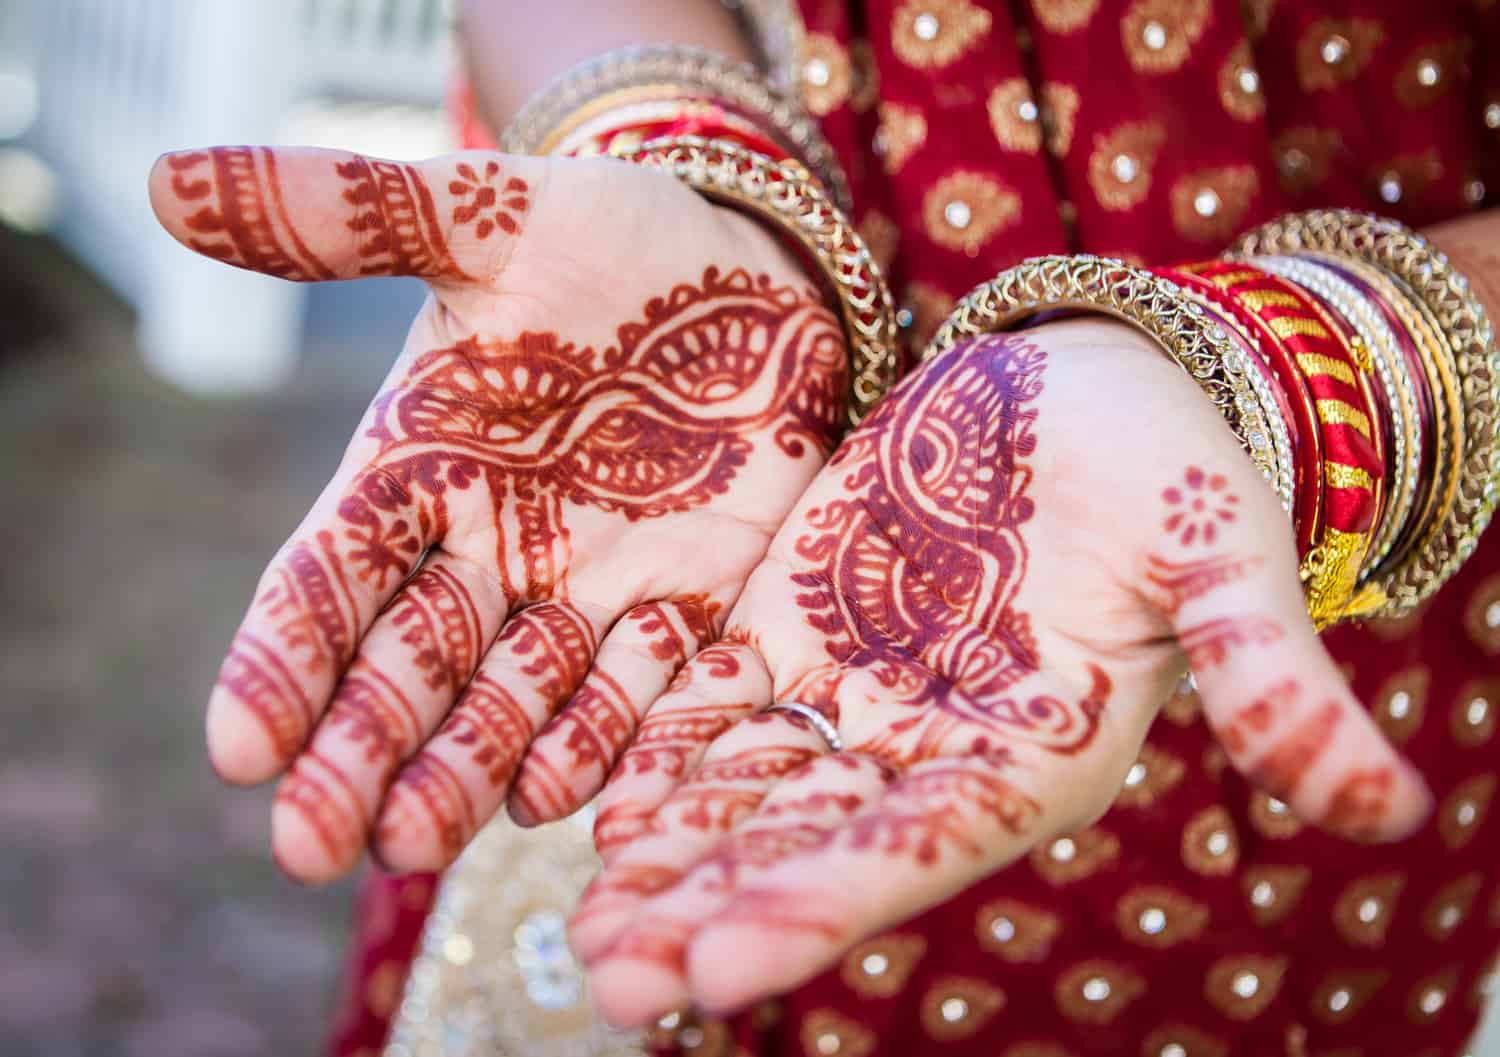 Close up on bride's hands with traditional henna design on skin